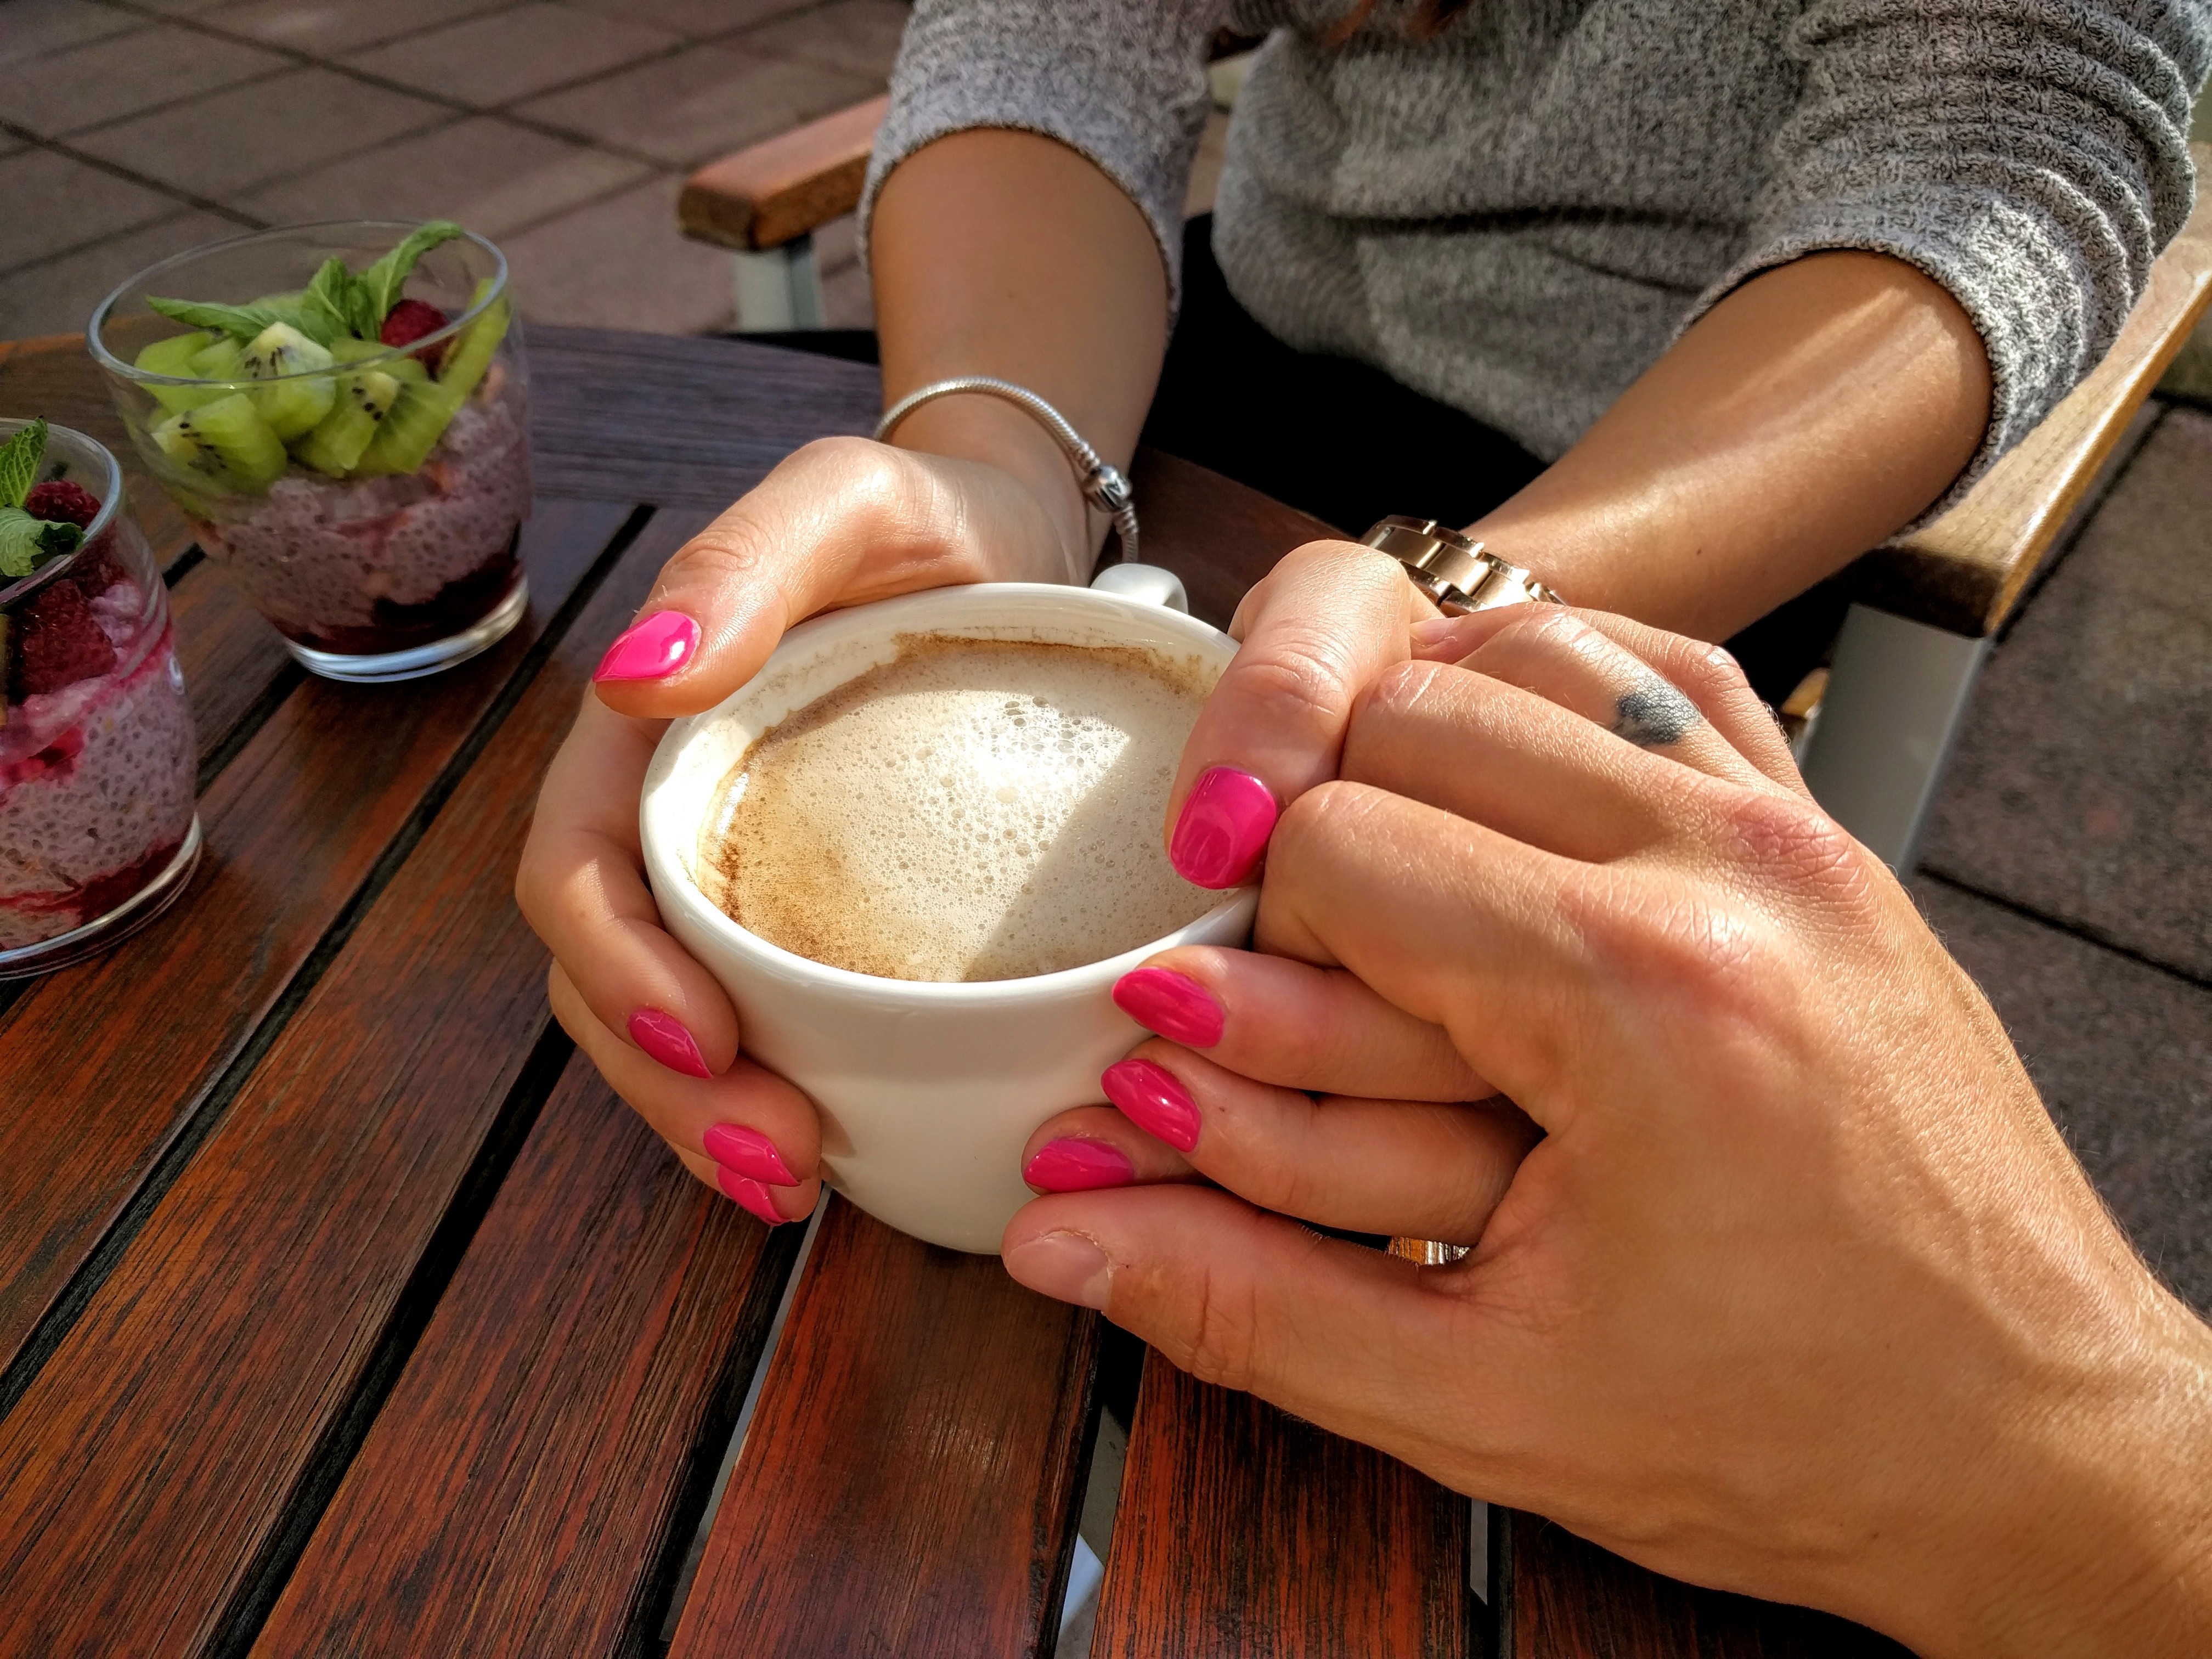 lovers holding coffee cup free stock photo by pexels